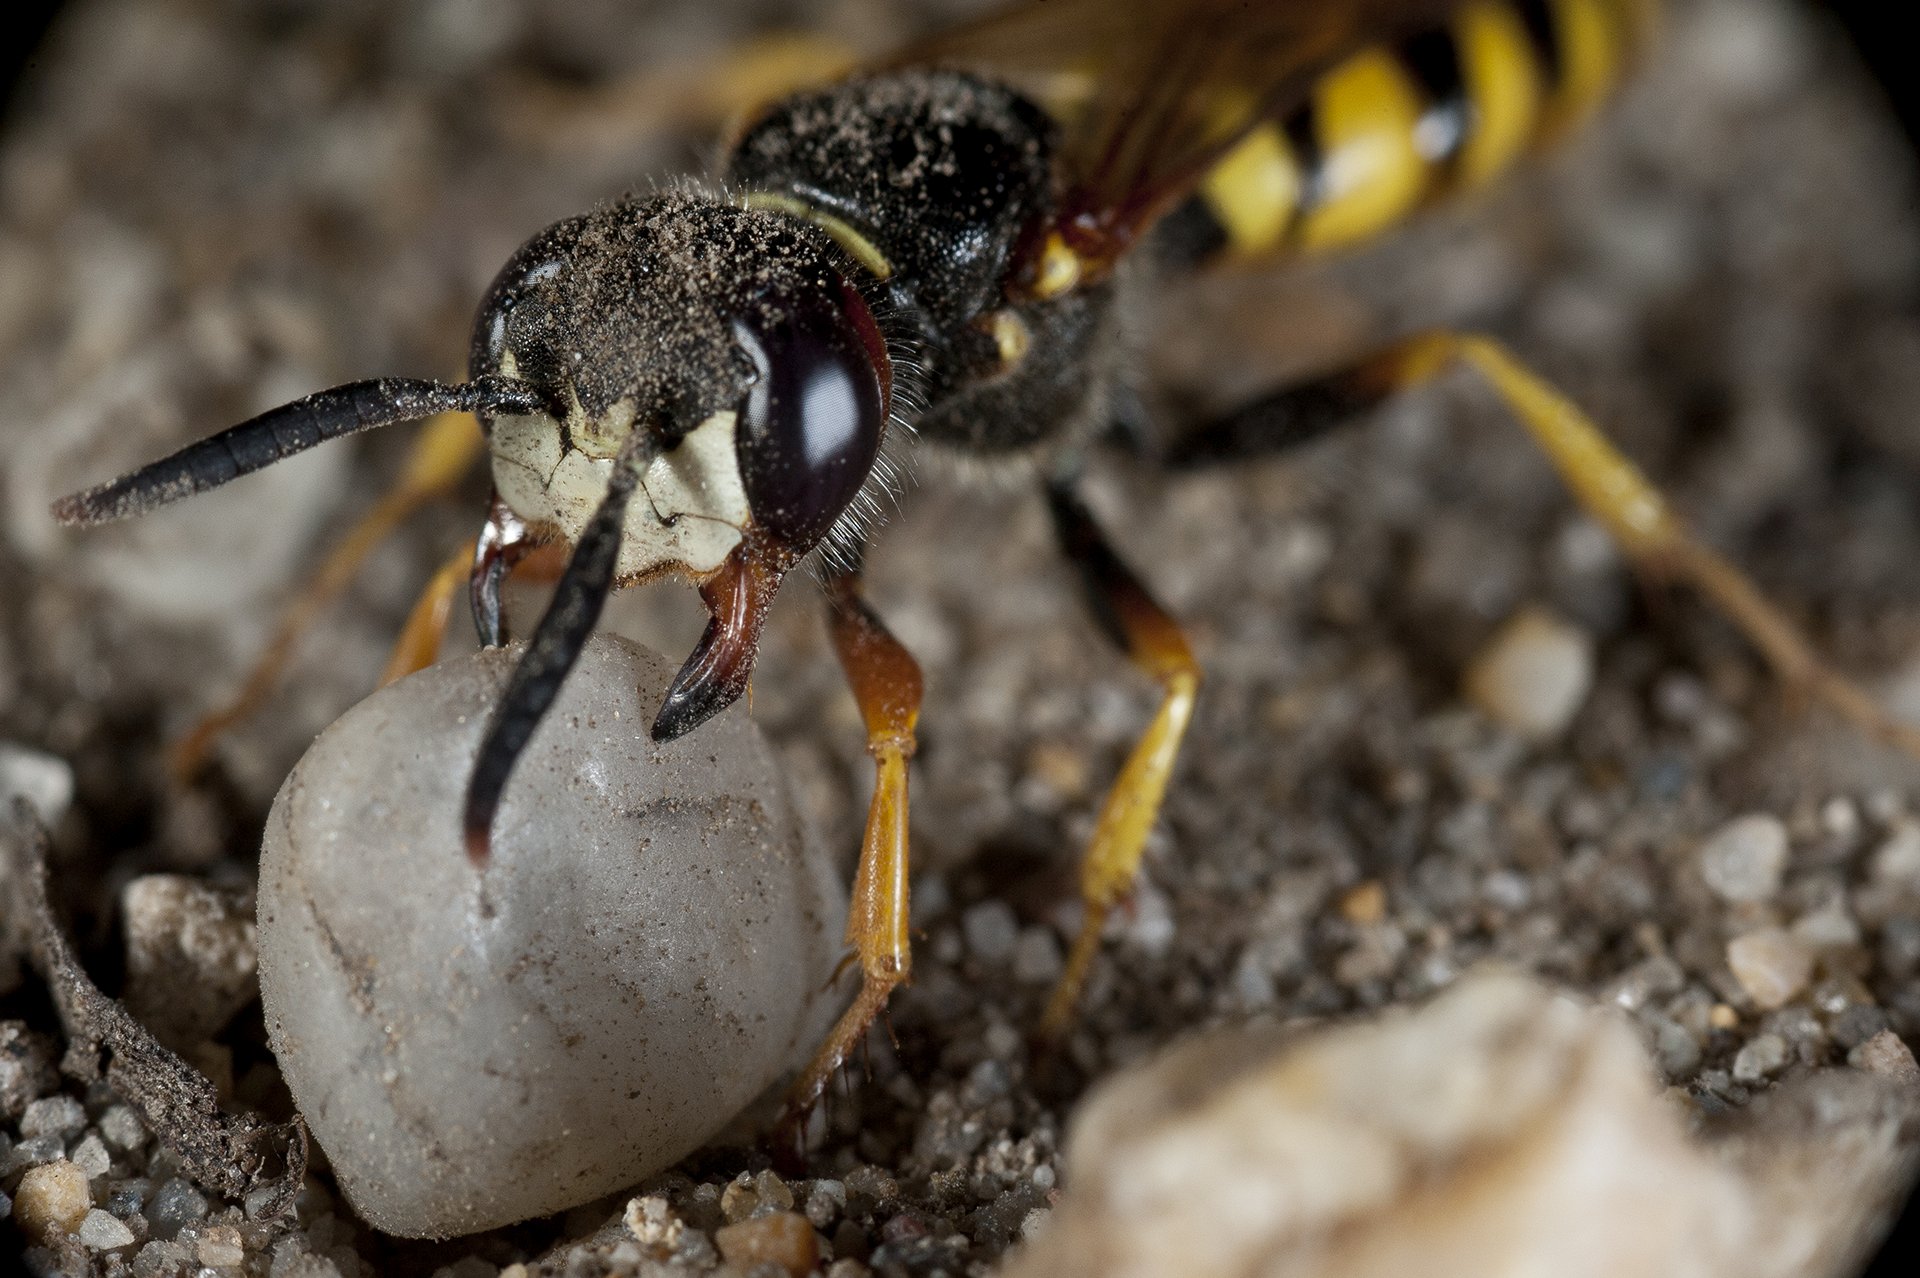 All day long they dig and hunt. Female beewolves will carry stones larger than their own bodies to construct suitable nest sites in soft, sandy soil, transporting handfuls every day to dig tunnels in the ground for nesting.